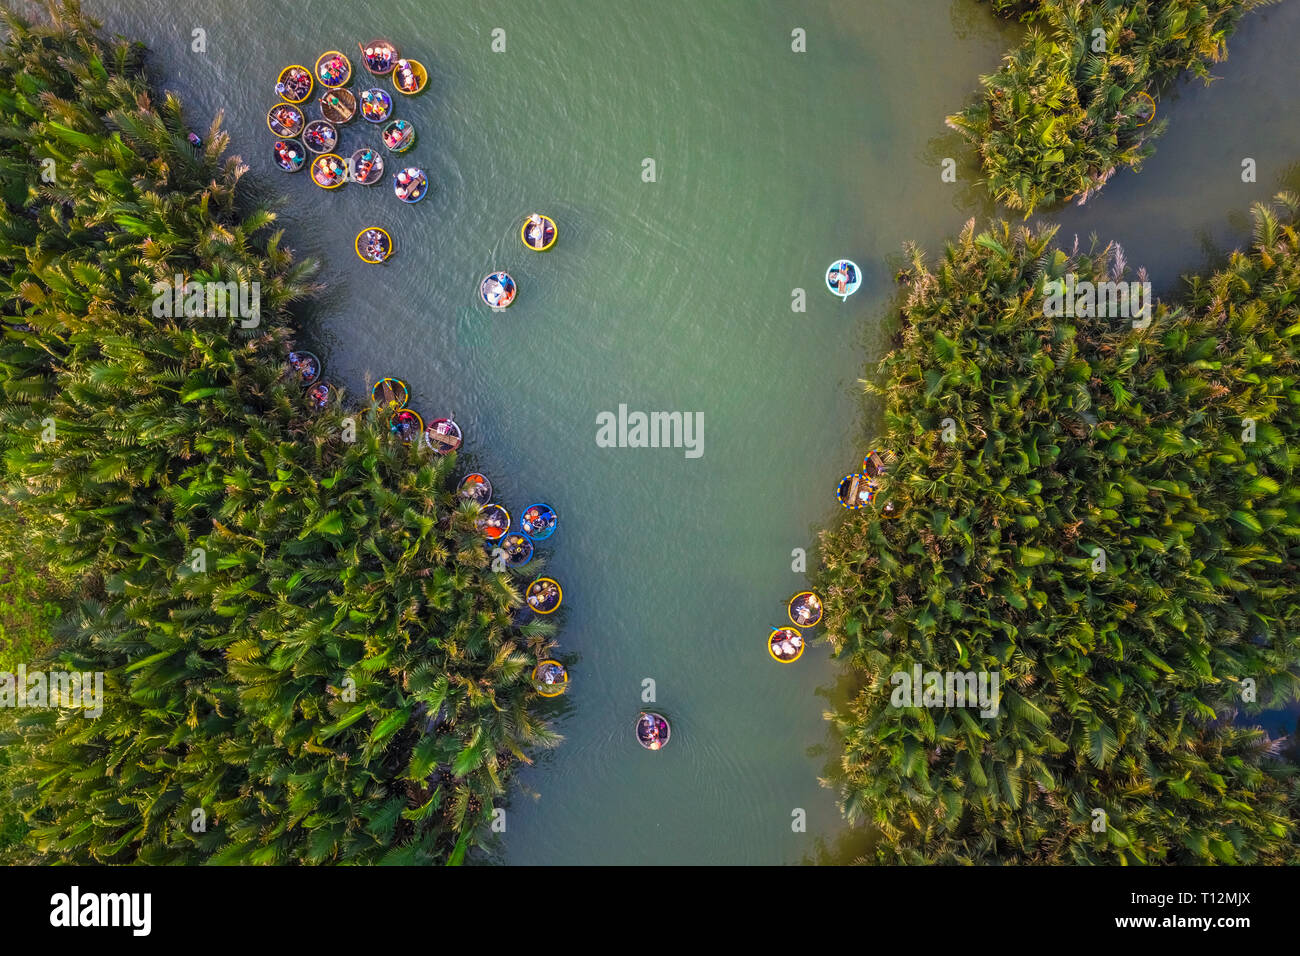 Aerial view, tourists from China, Korea, America, Russia a basket boat tour at the coconut water ( mangrove palm ) forest Hoi An, Quang Nam, Vietnam Stock Photo